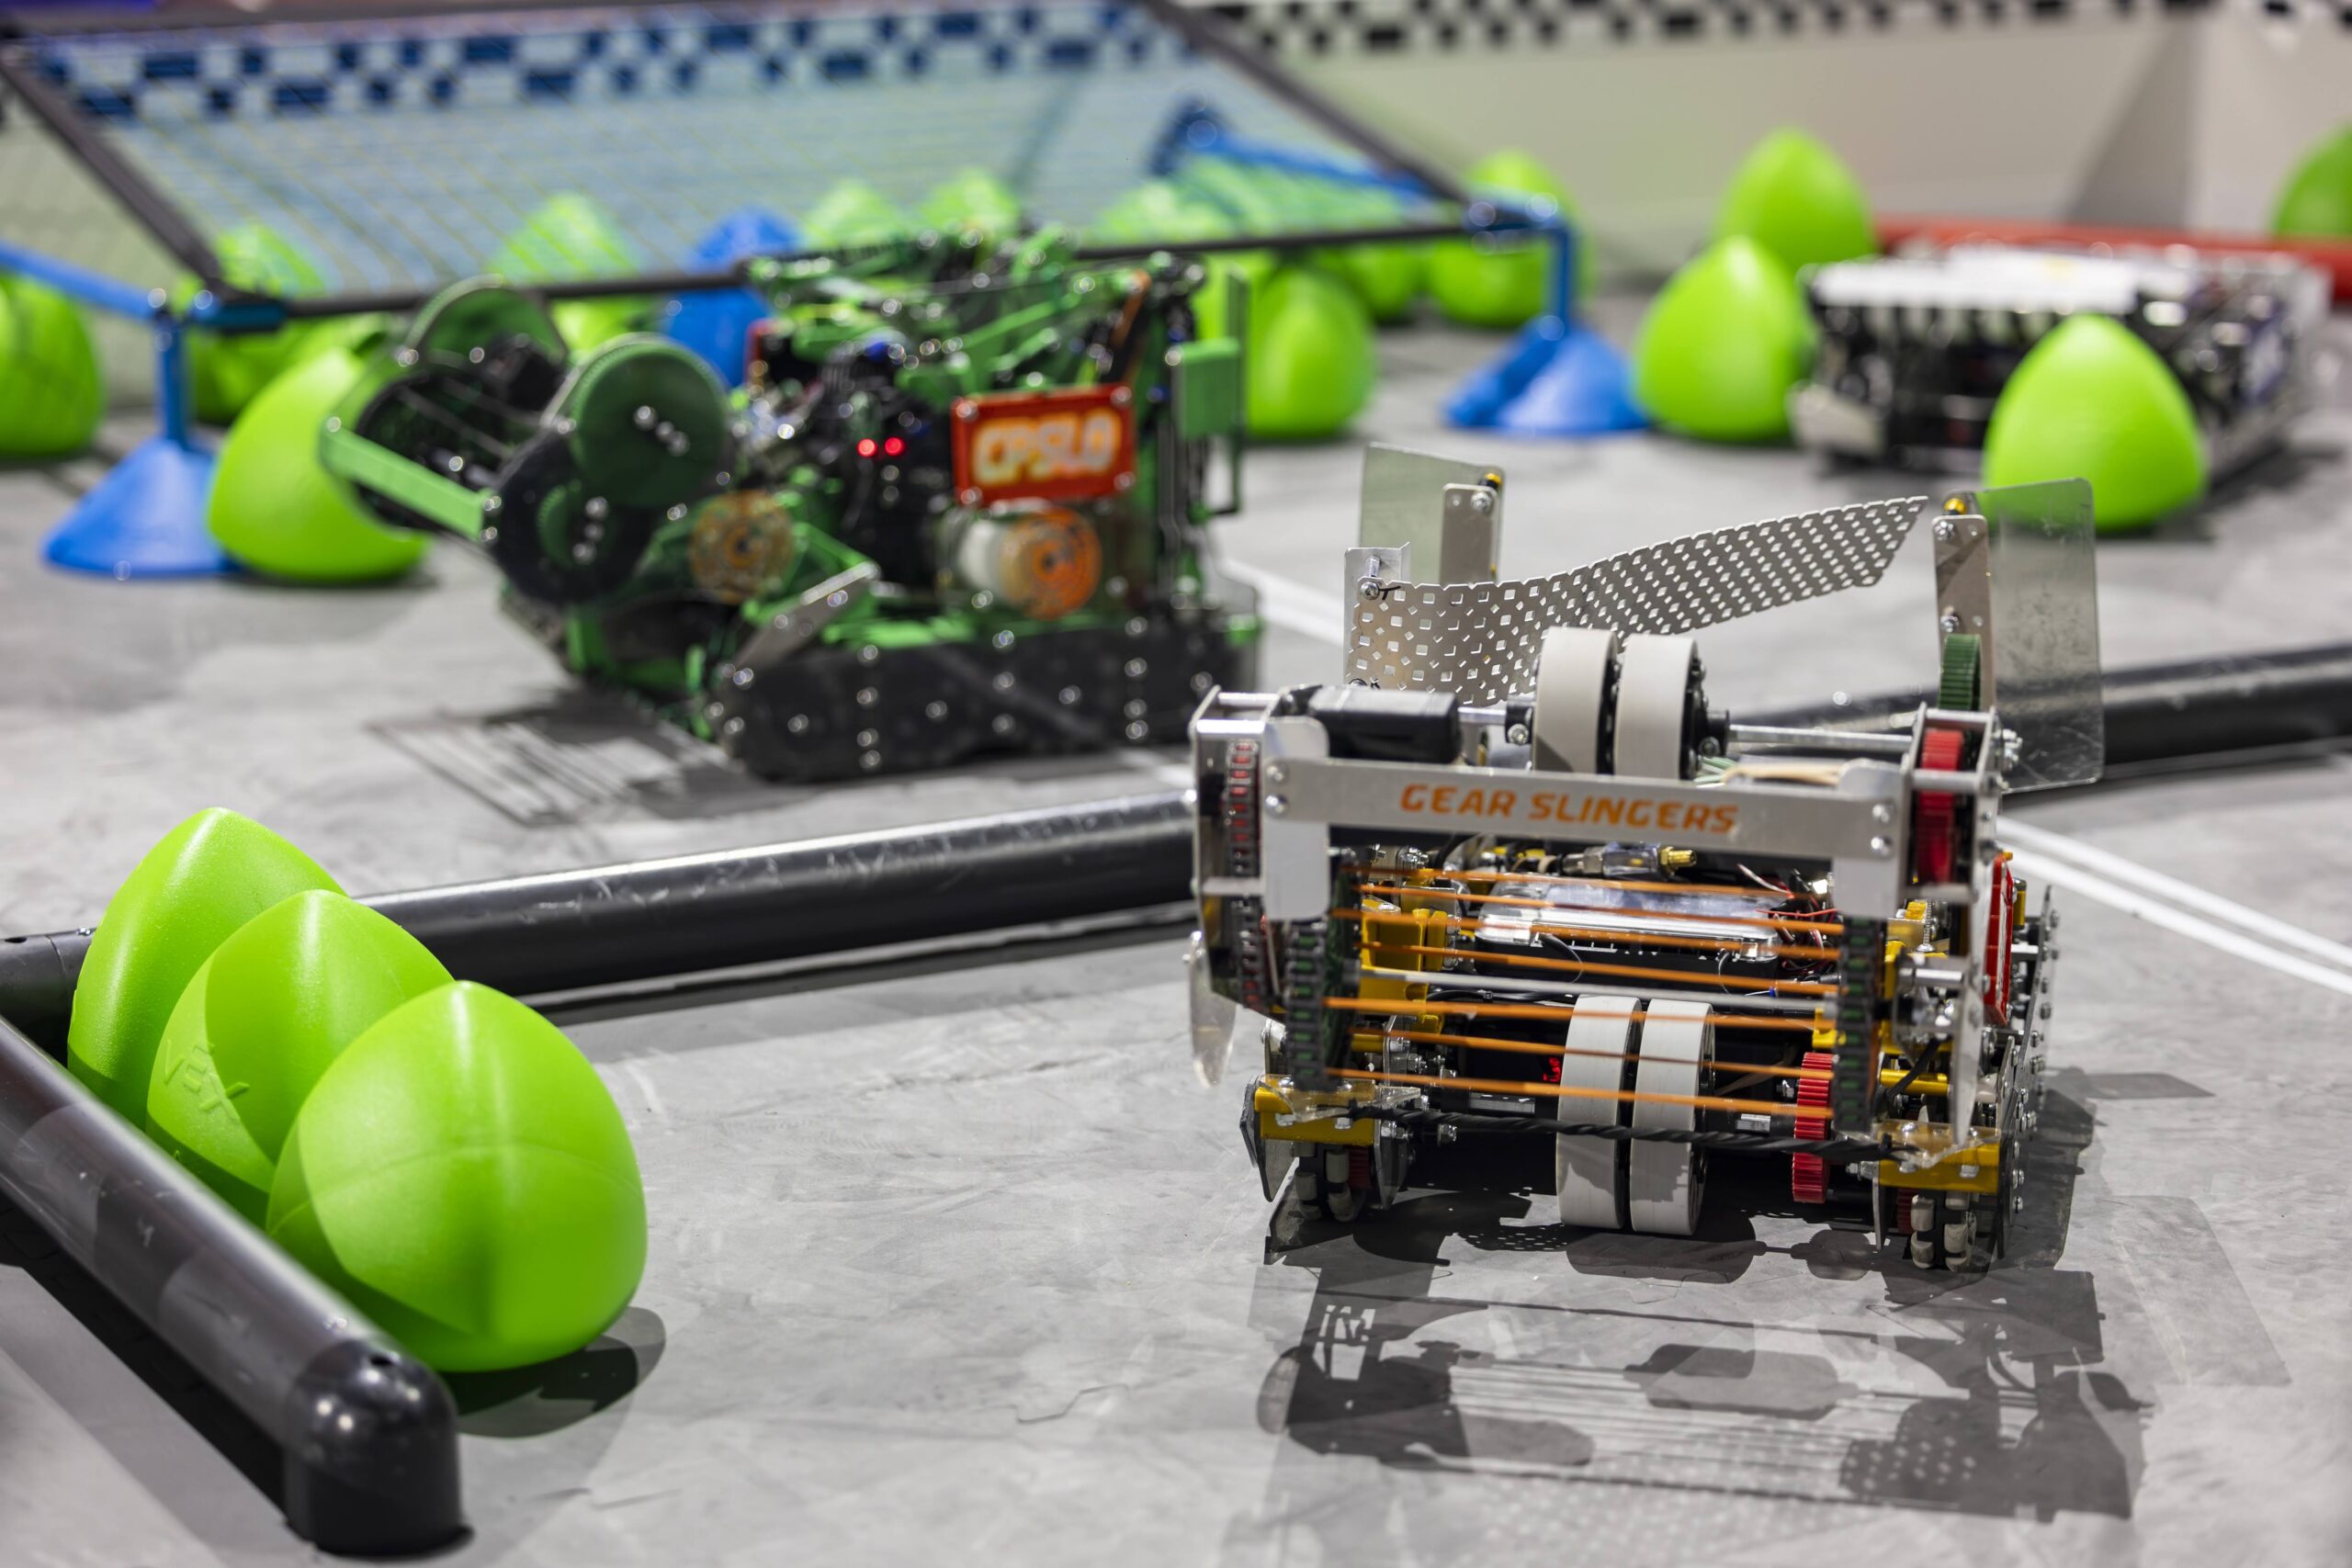 The Gear Slingers' two robots are pictured on the game field with game pieces, Triballs